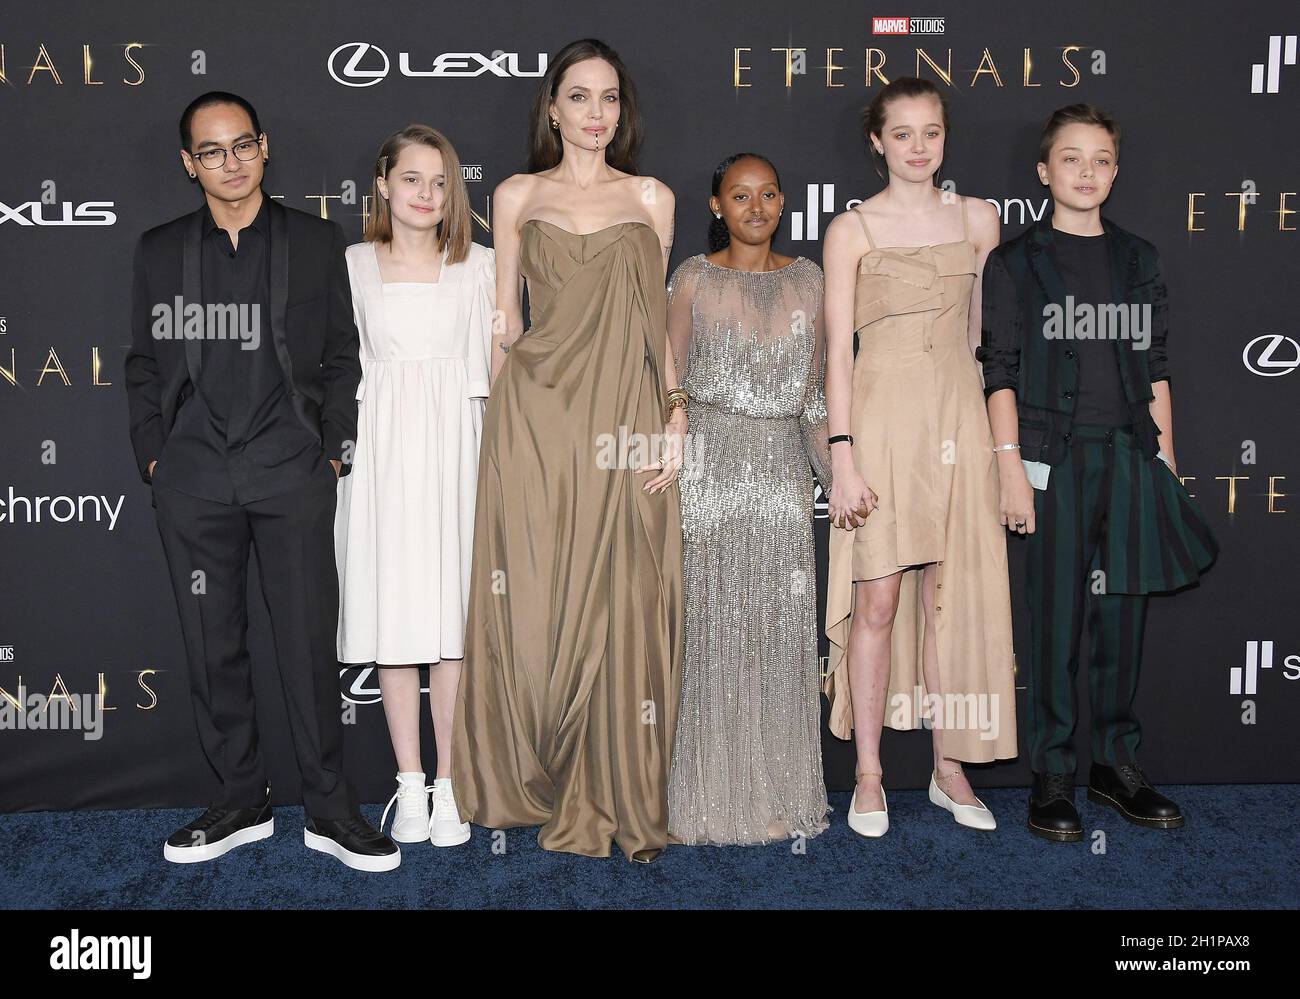 Los Angeles, USA. 18th Oct, 2021. (L-R) Maddox Jolie-Pitt, Vivienne Jolie-Pitt, Angelina Jolie, Zahara Jolie-Pitt, Shiloh Jolie-Pitt and Knox Jolie-Pitt at Marvel Studios' ETERNALS Los Angeles Premiere held at The DolbyTheater in Hollywood, CA on Monday, ?October 18, 2021. (Photo By Sthanlee B. Mirador/Sipa USA) Credit: Sipa USA/Alamy Live News Stock Photo